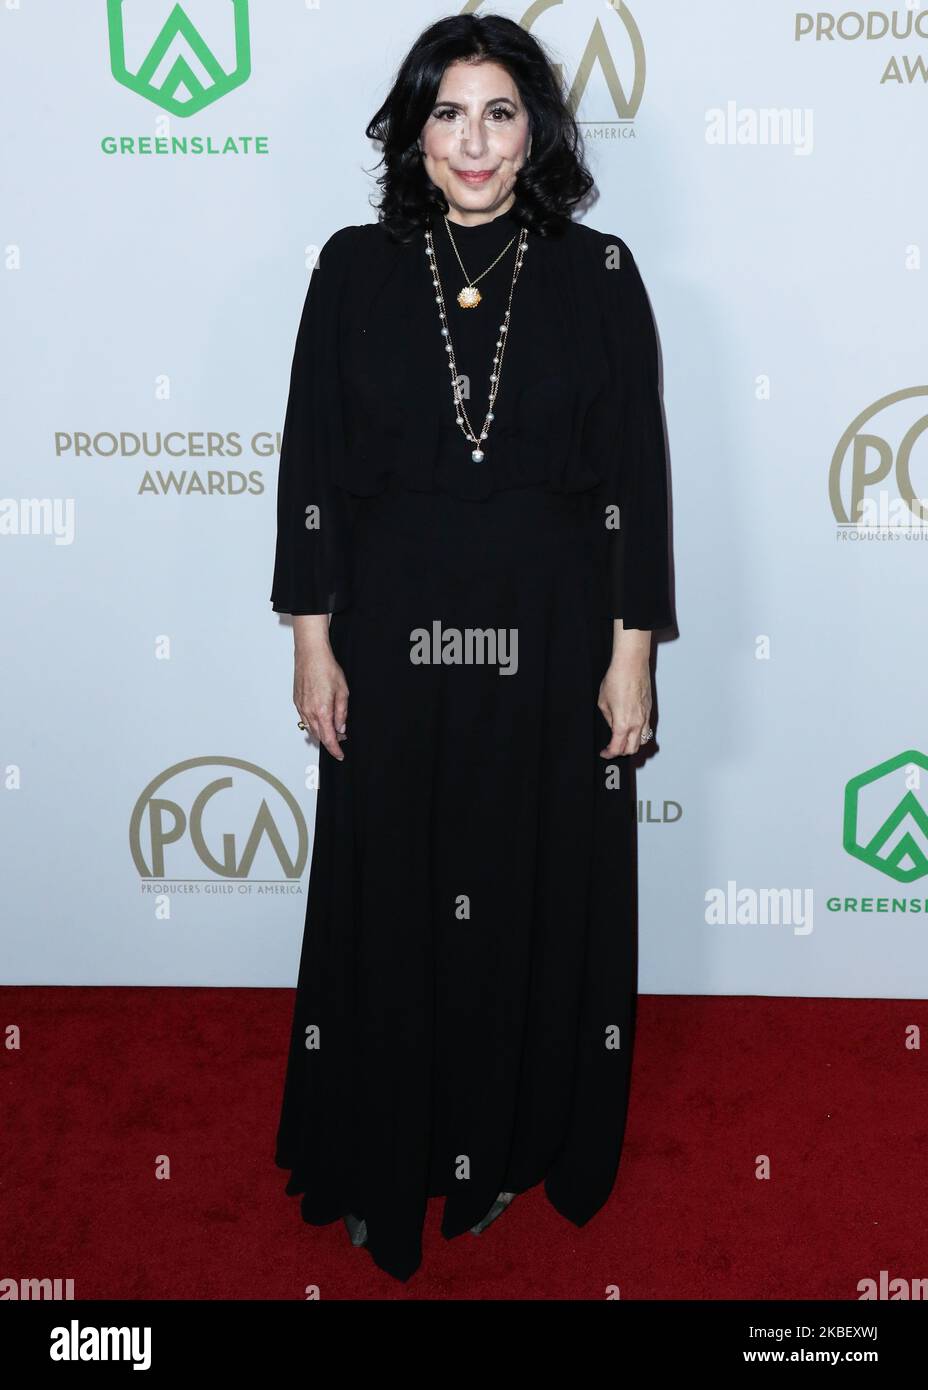 HOLLYWOOD, LOS ANGELES, CALIFORNIA, USA - JANUARY 18: Producer Sue Kroll arrives at the 31st Annual Producers Guild Awards held at the Hollywood Palladium on January 18, 2020 in Hollywood, Los Angeles, California, United States. (Photo by Xavier Collin/Image Press Agency/NurPhoto) Stock Photo